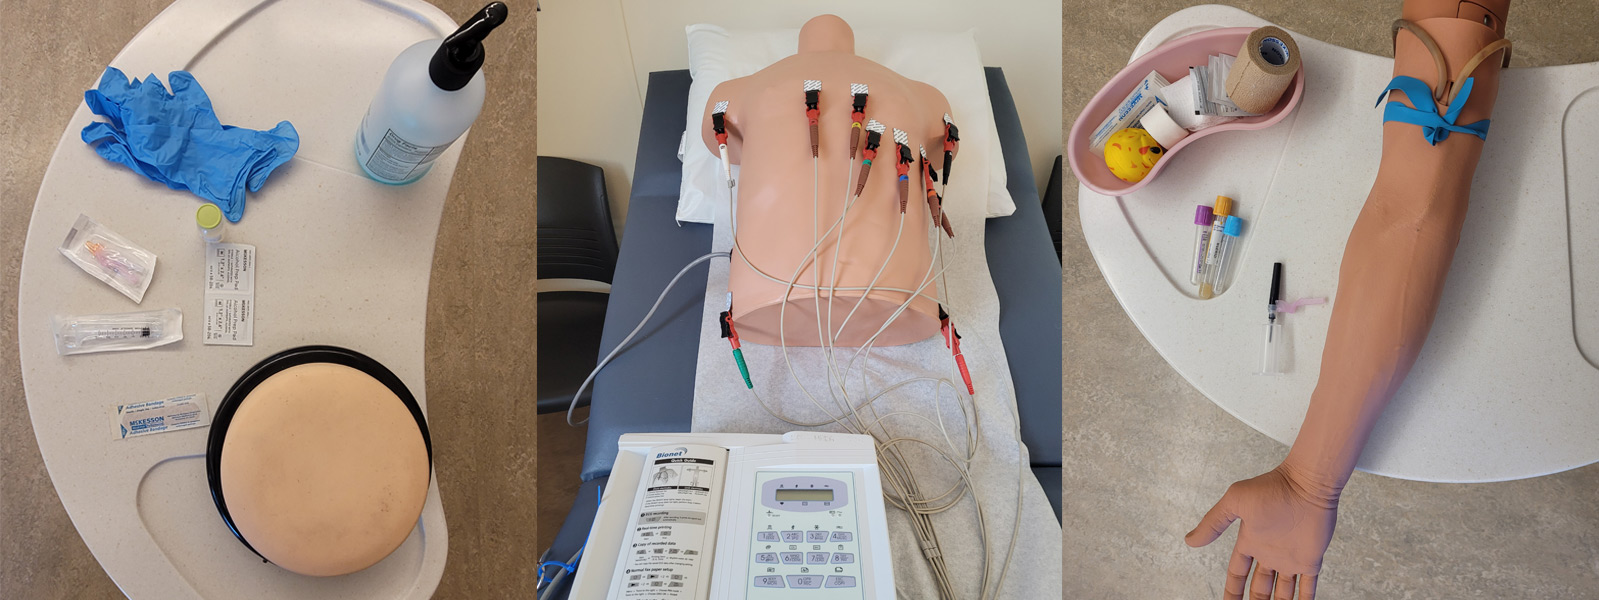 collage of medical assisting images: table with medical supplies; practice torso with wires for testing; pratice arm with IV and band in it.